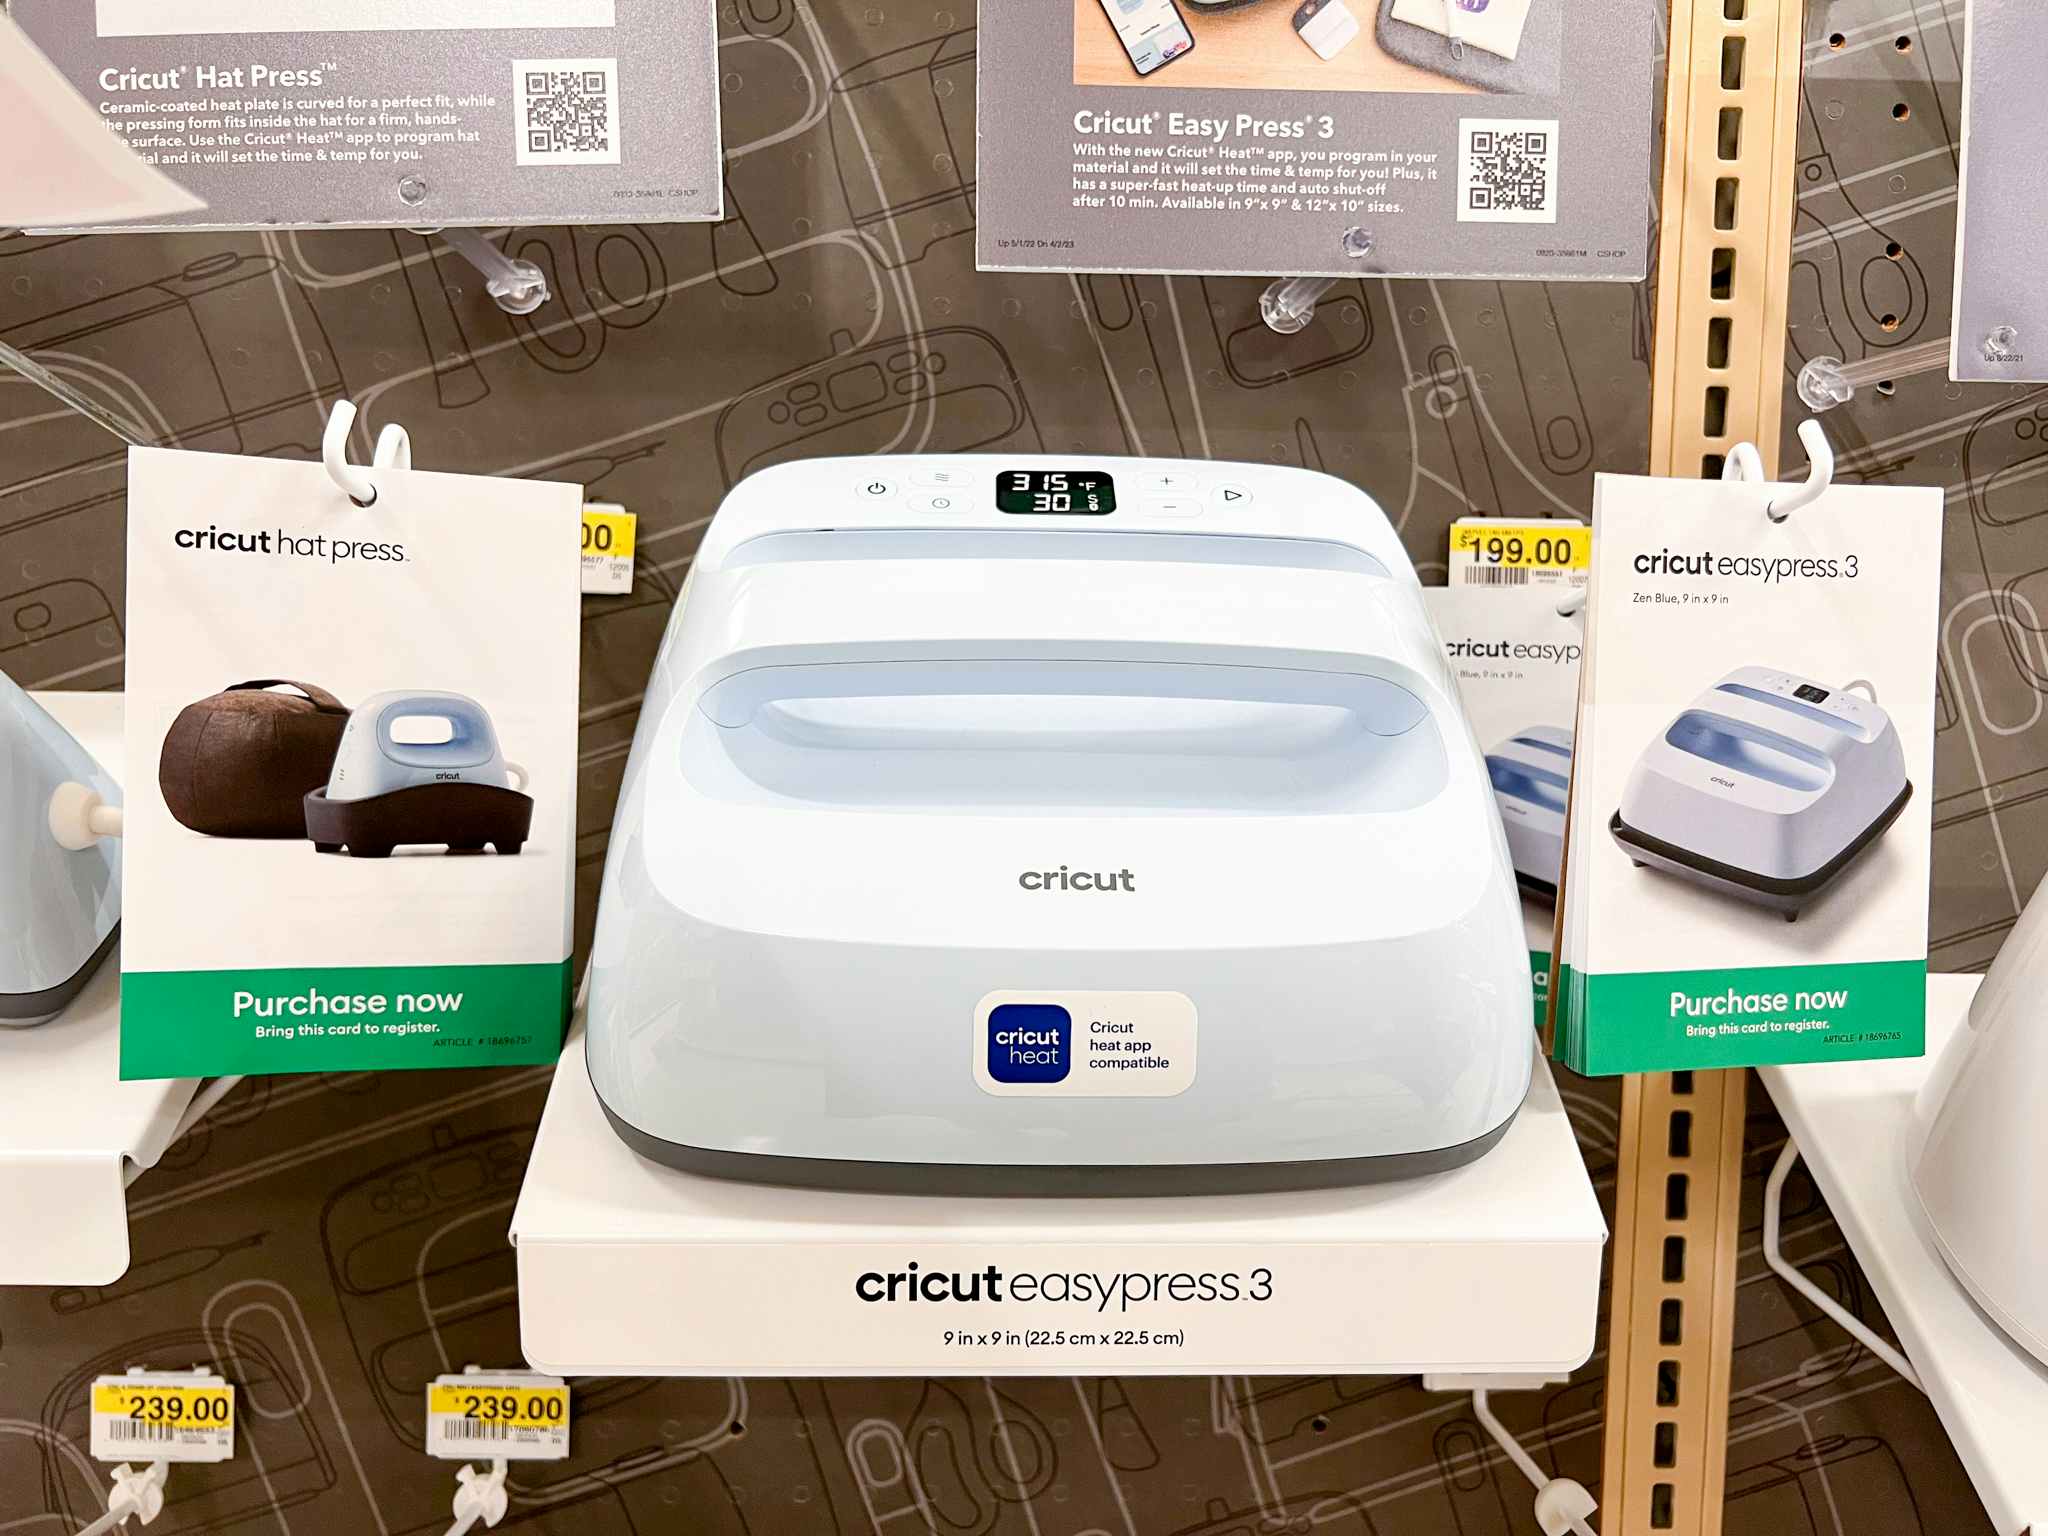 A Cricut Easypress 3 machine on display in a store